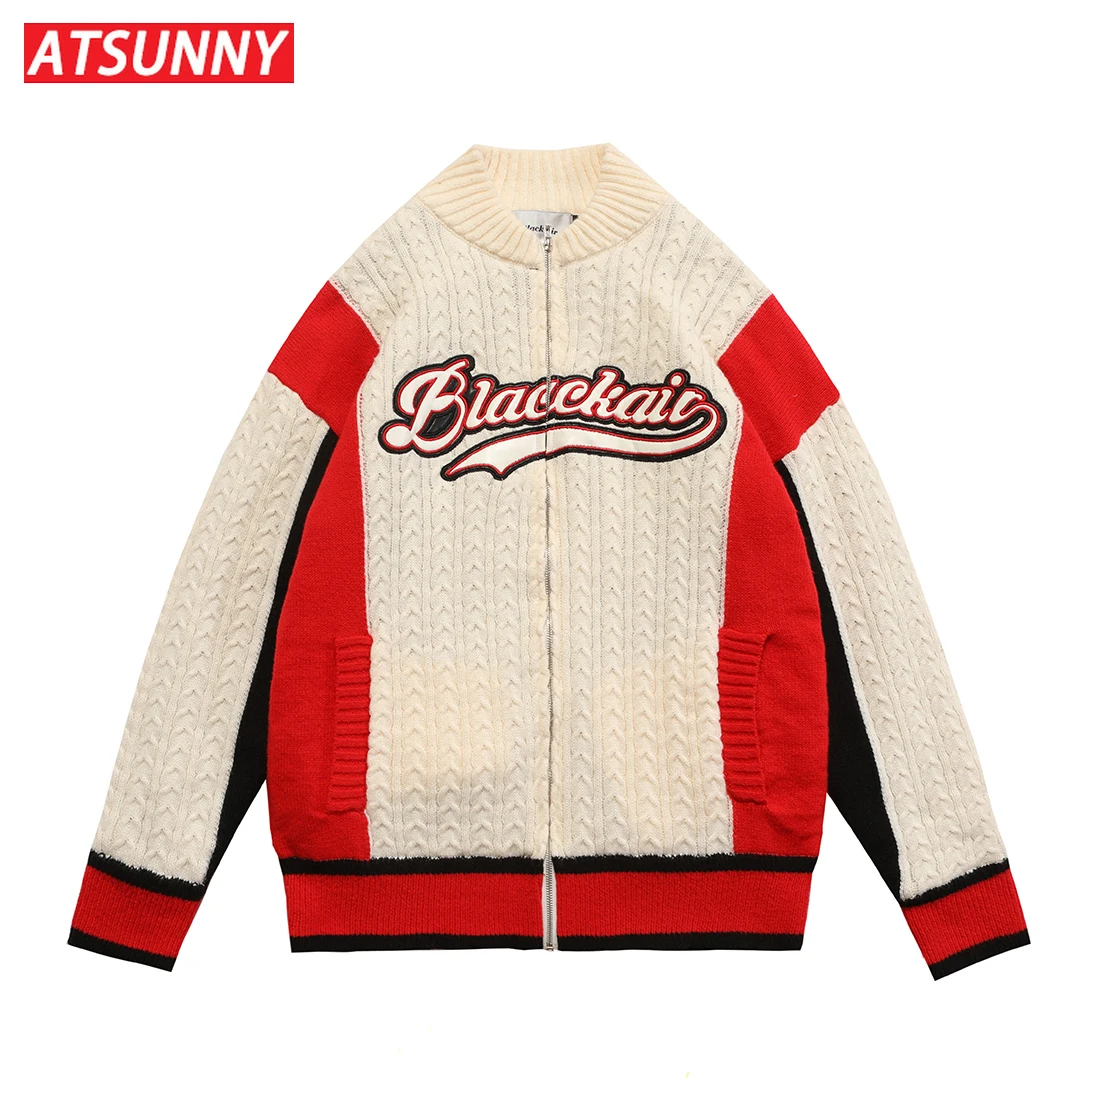 

ATSUNNY American Streetwear Retro Sweater Stitch Color Campus Style Quilted Jacket Harajuku Style Man Autumn and Winter Clothes